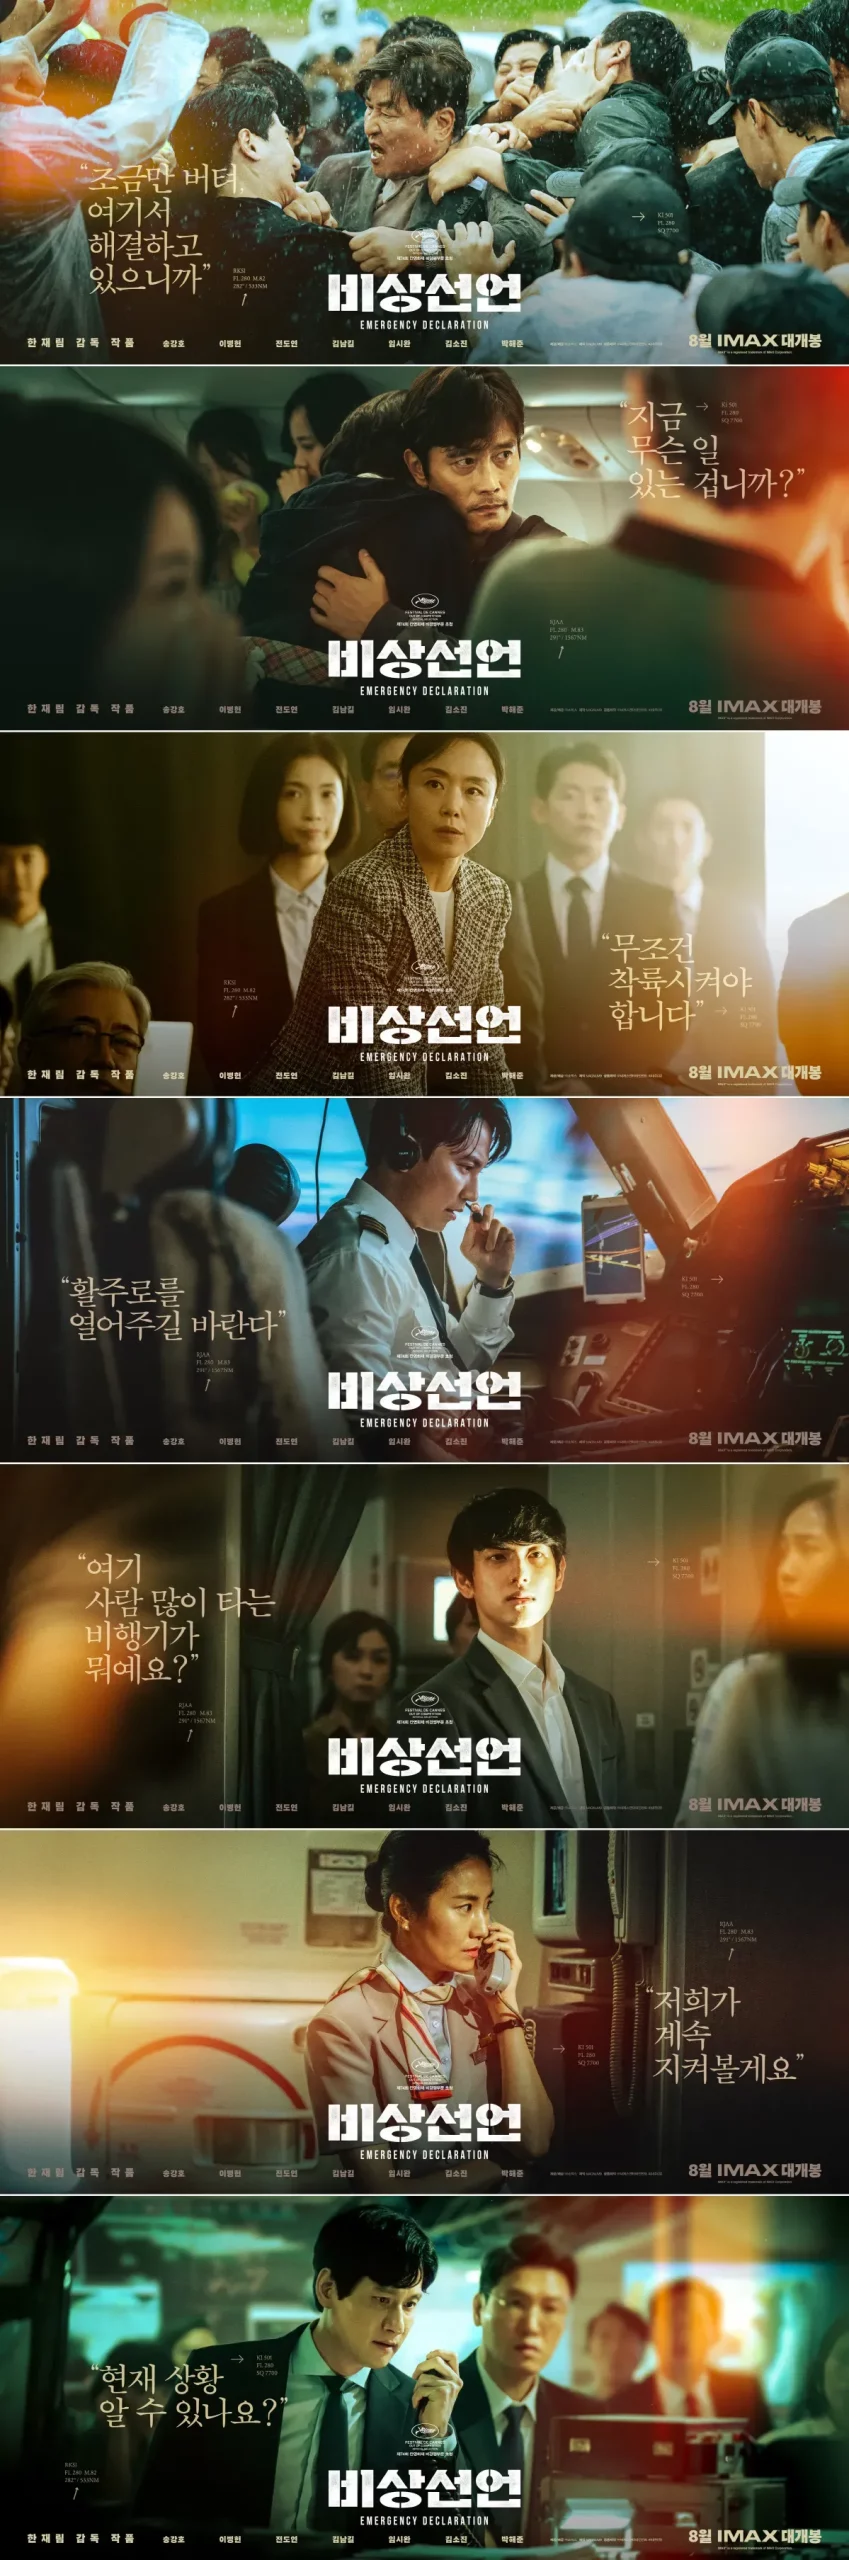 Air crash movie 'Emergency Declaration' starring Kang-ho Song and Byung-hun Lee released character posters | FMV6